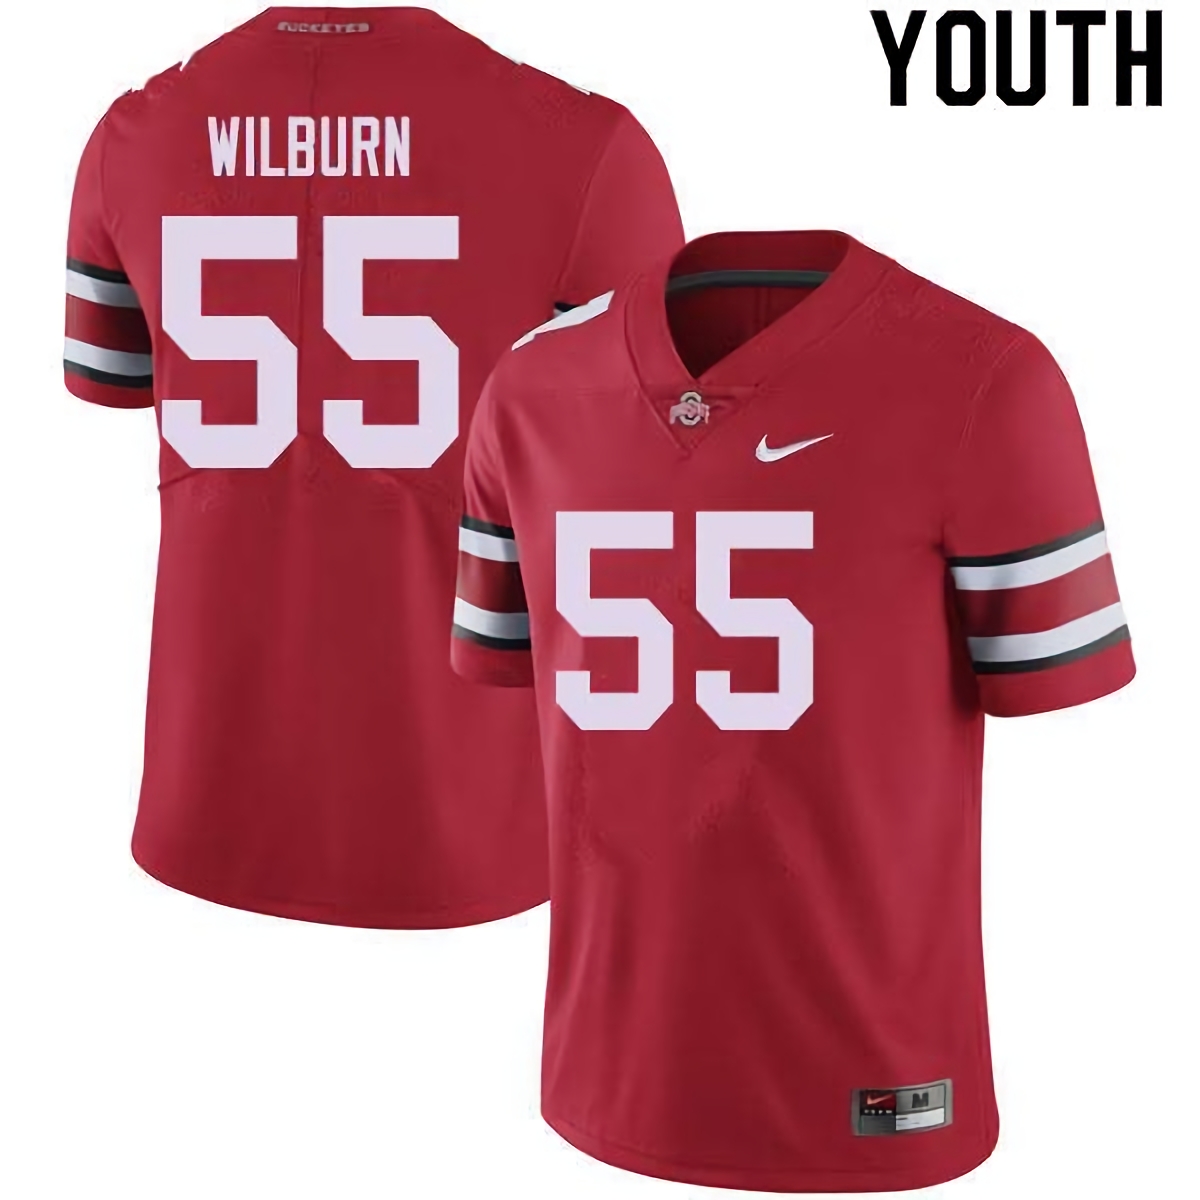 Trayvon Wilburn Ohio State Buckeyes Youth NCAA #55 Nike Red College Stitched Football Jersey QOK4756SC